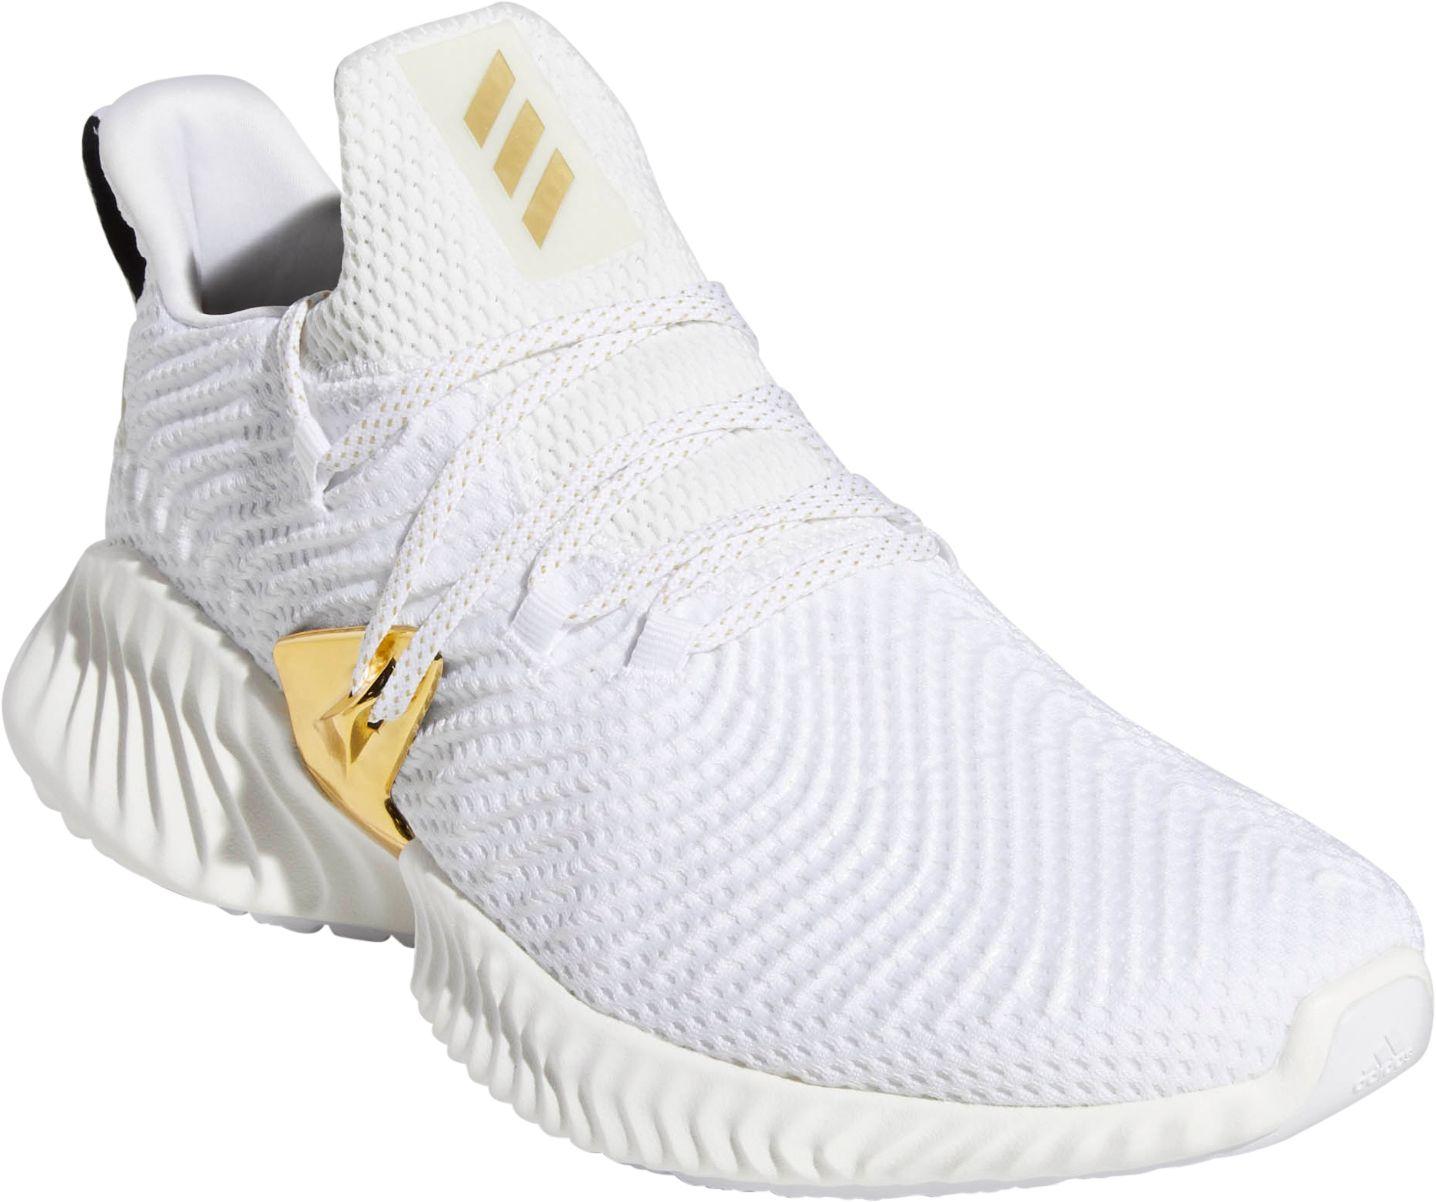 adidas alphabounce white and gold Promotions